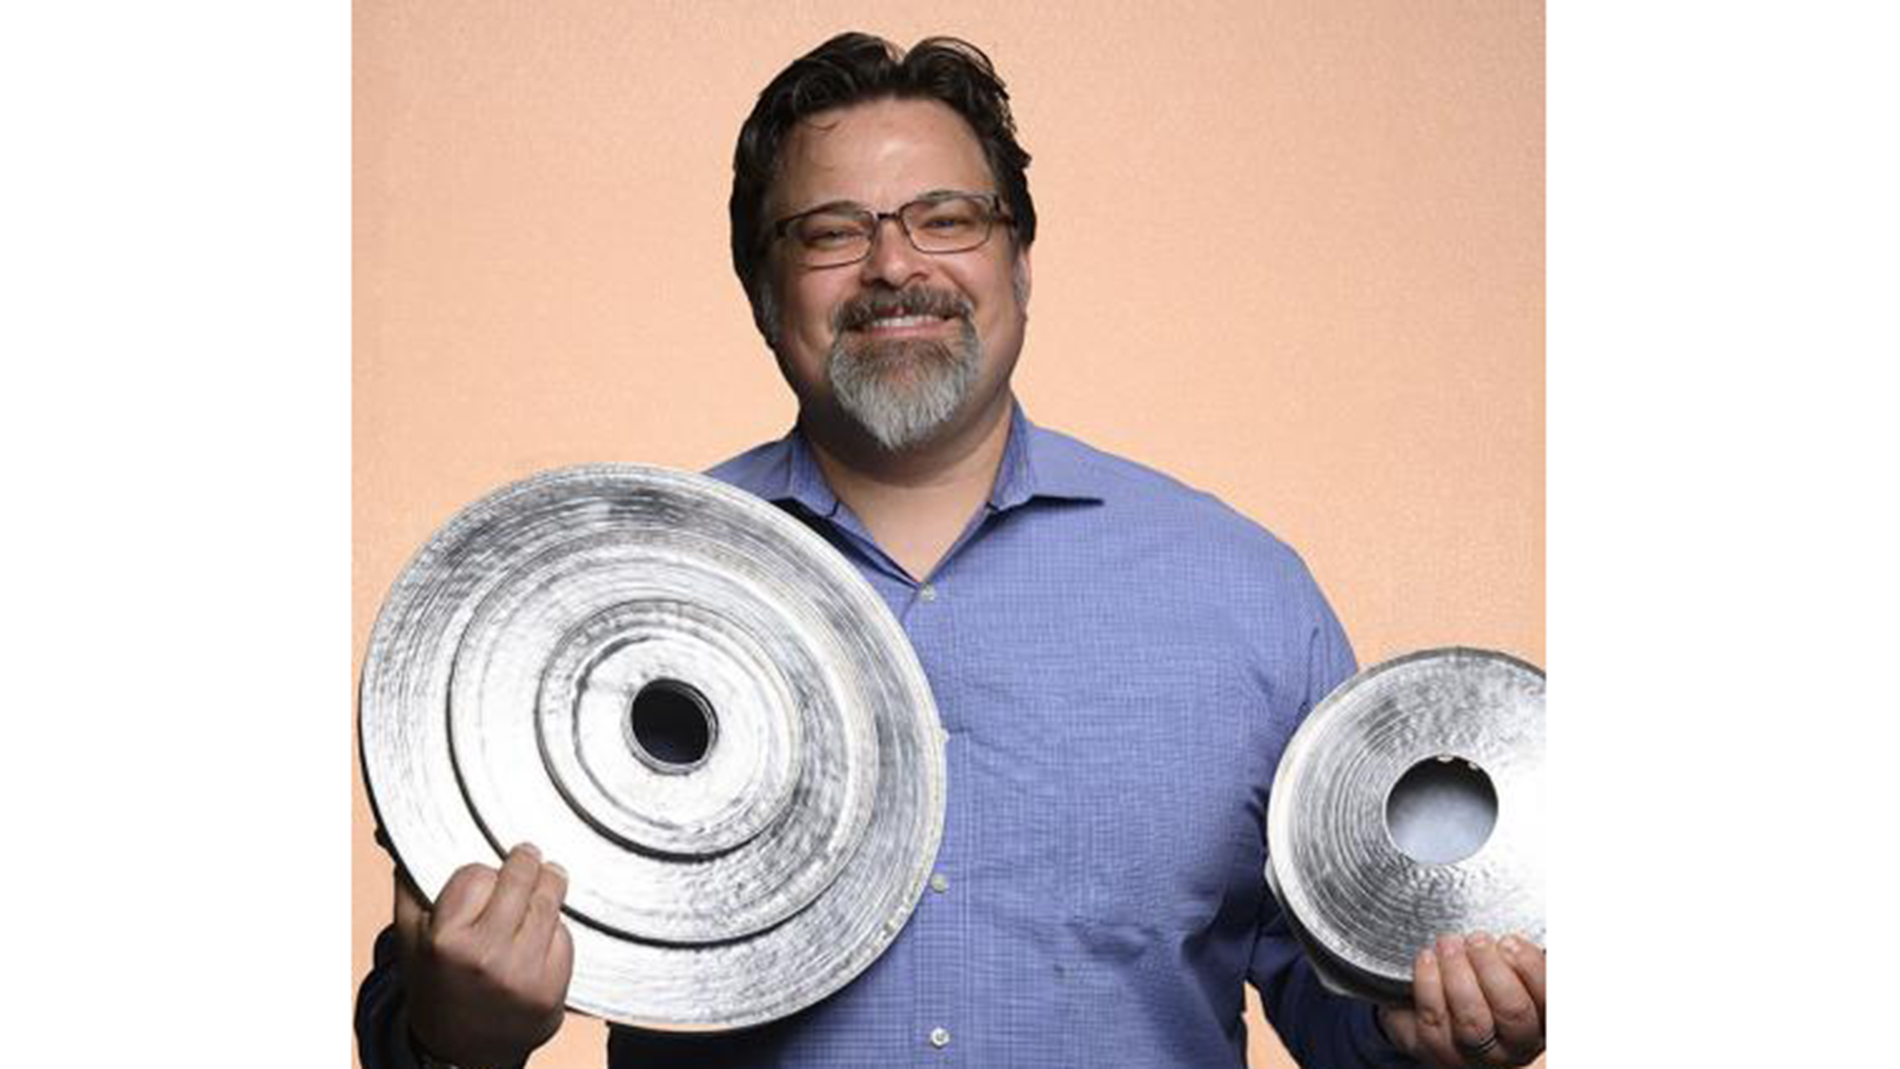 Jeff Lints, founder and CEO of Fortius Metals, with parts. Image: Fortius Metal